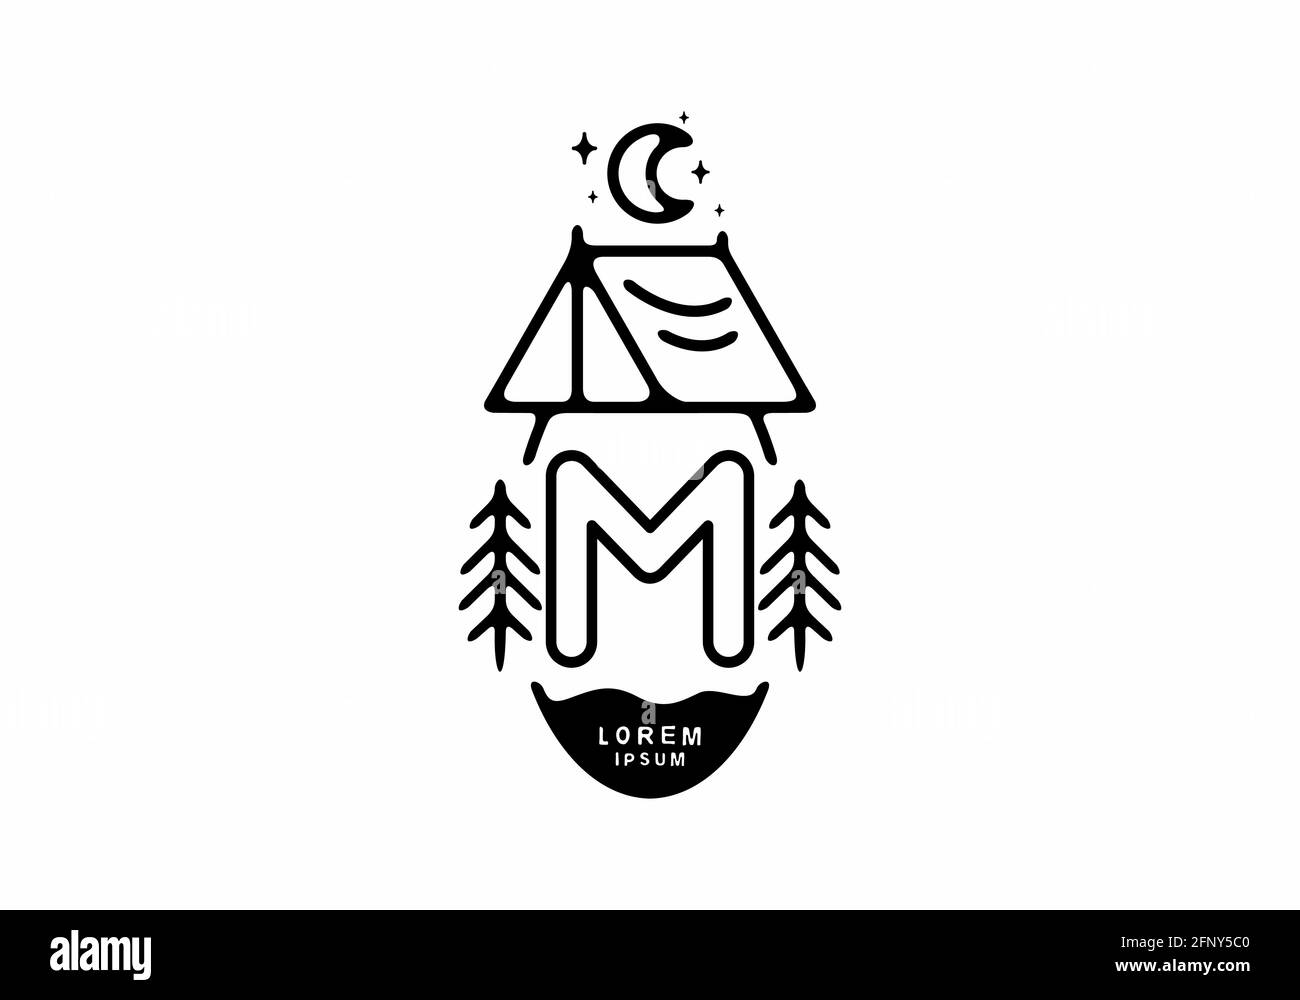 Black line art illustration of camping tent badge with M letter design Stock Vector